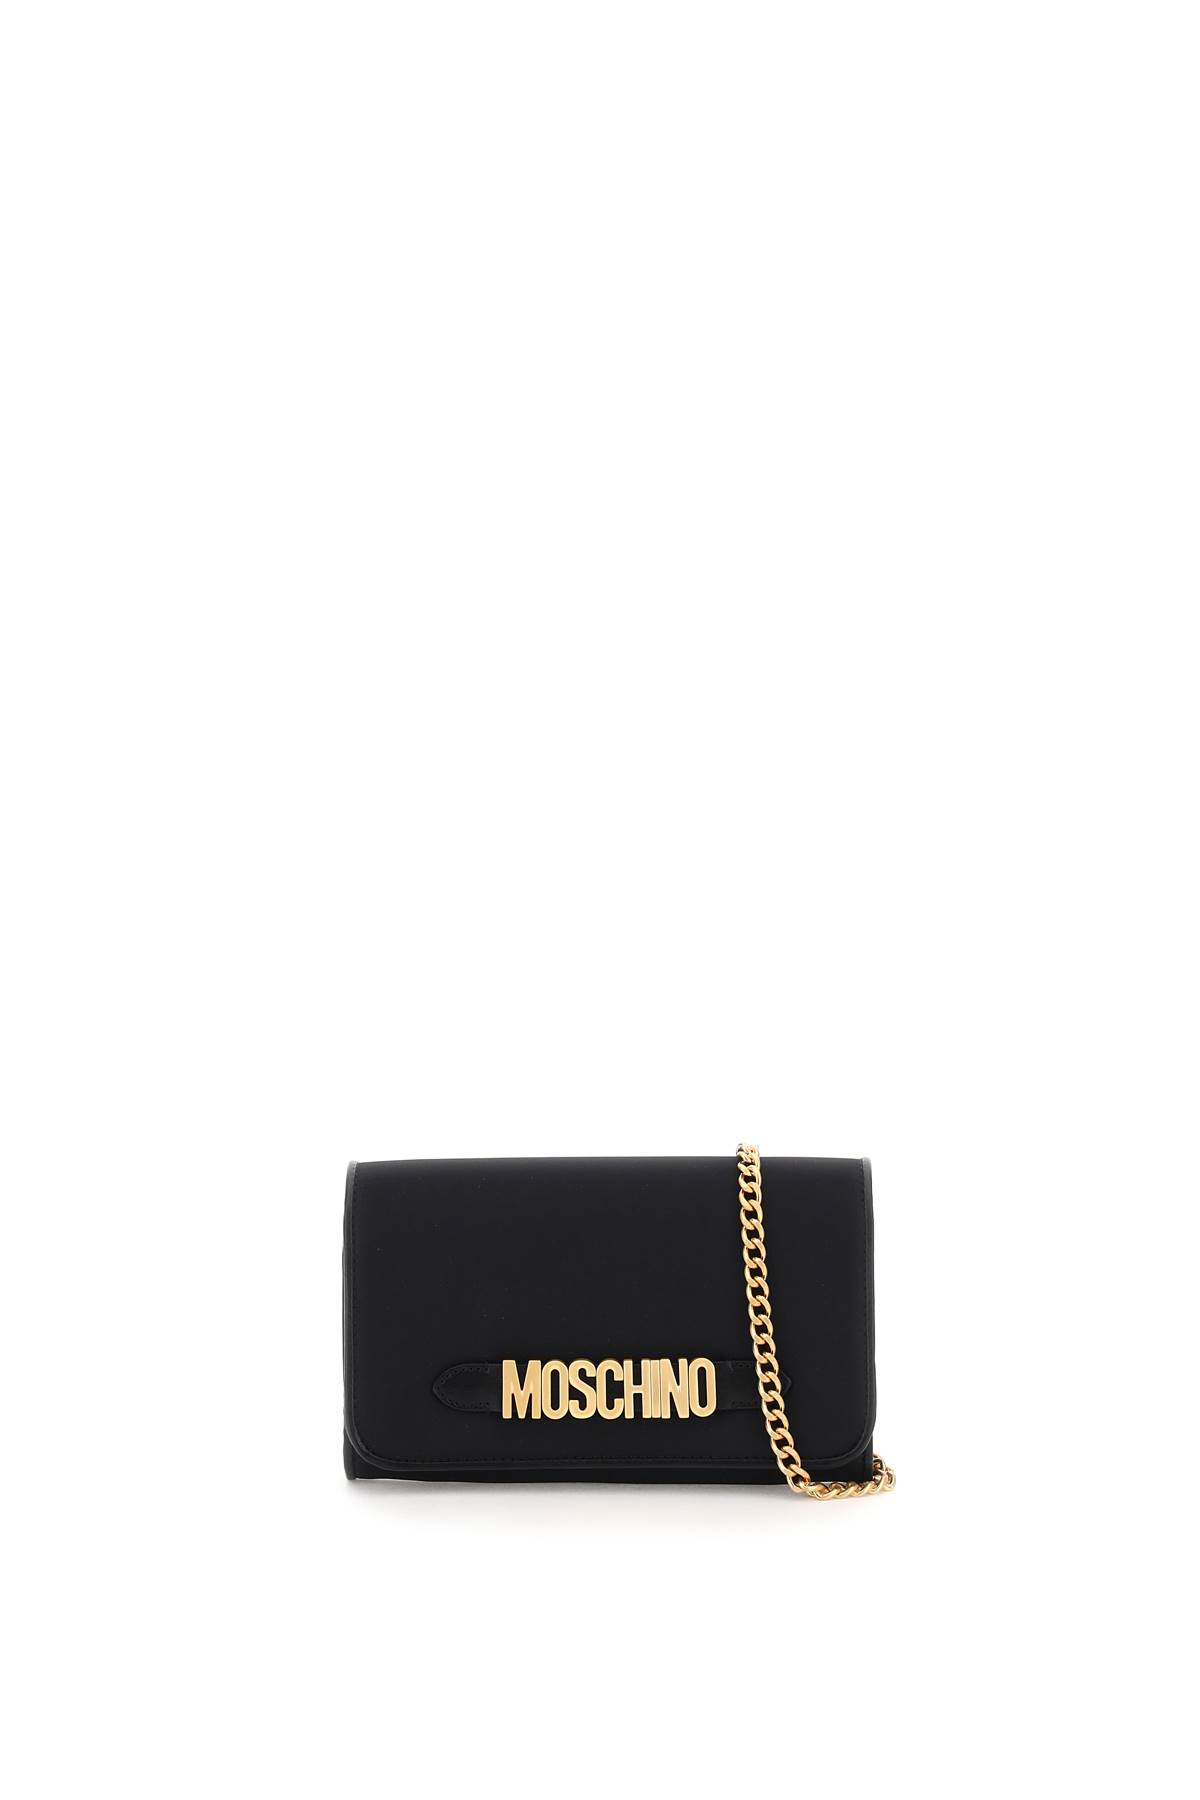 Moschino Clutch On Chain In Black